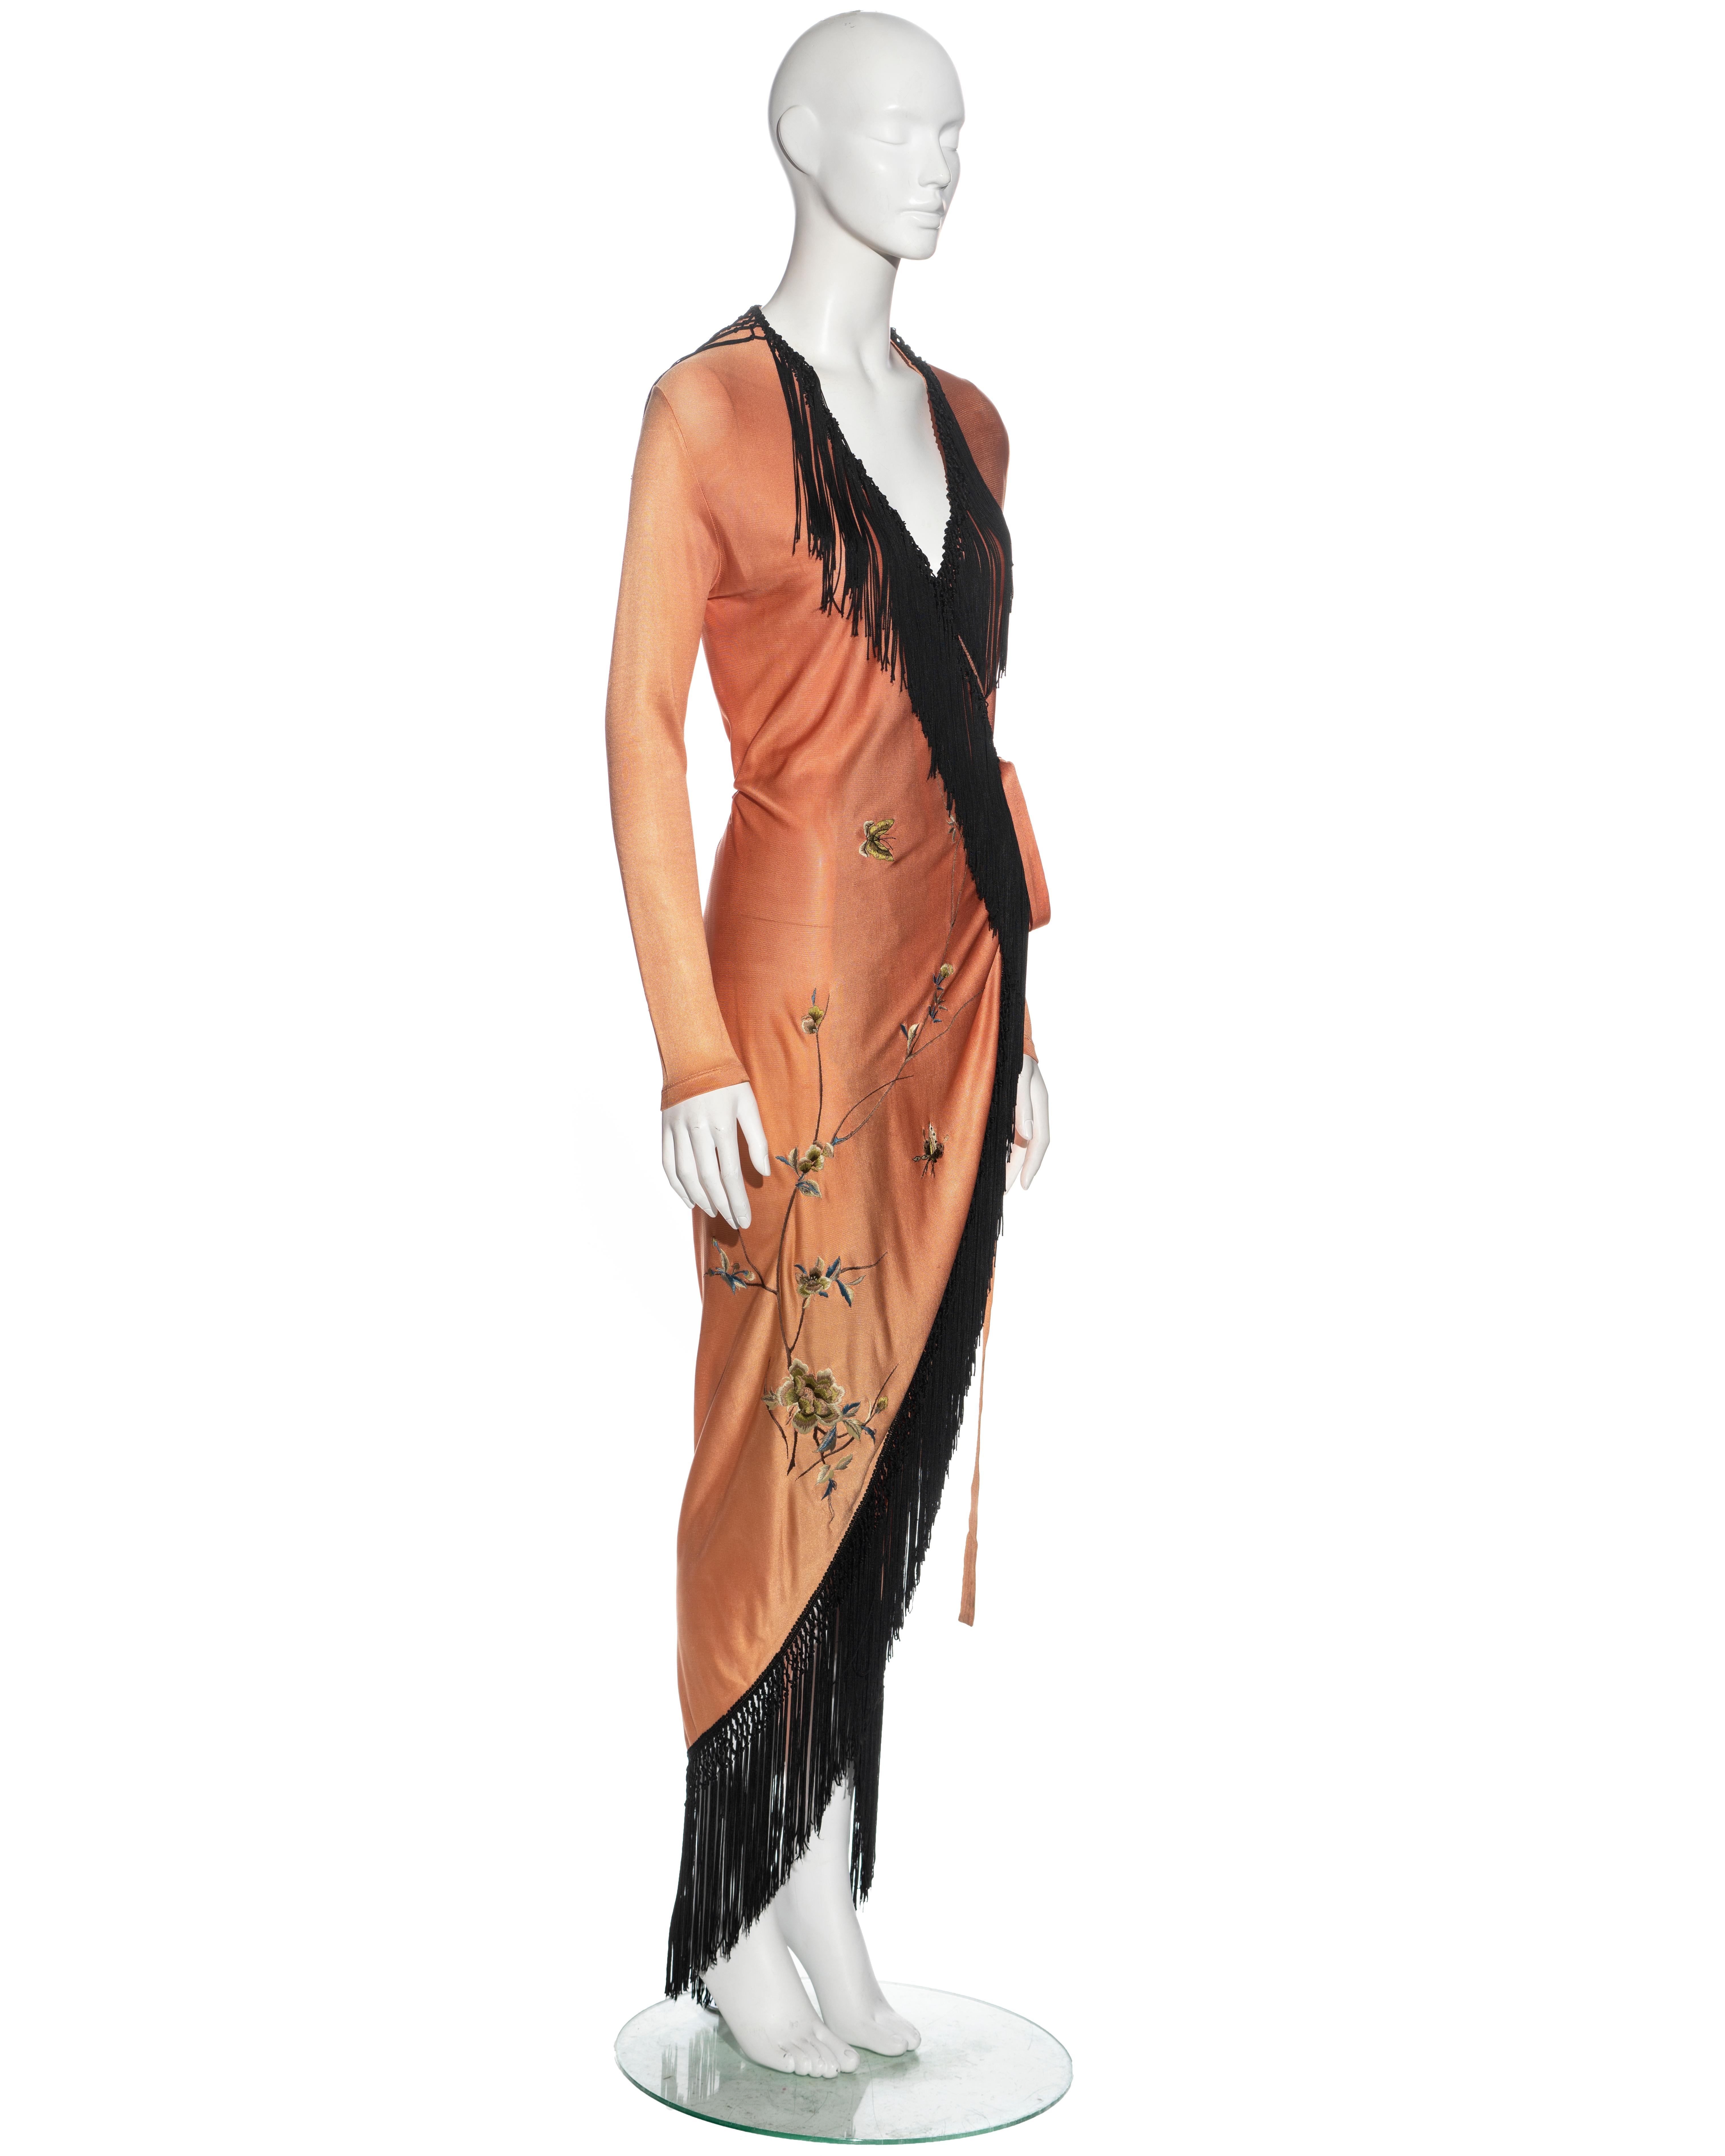 Women's Jean Paul Gaultier pale peach wrap dress with floral embroidery, c. 1991-1994